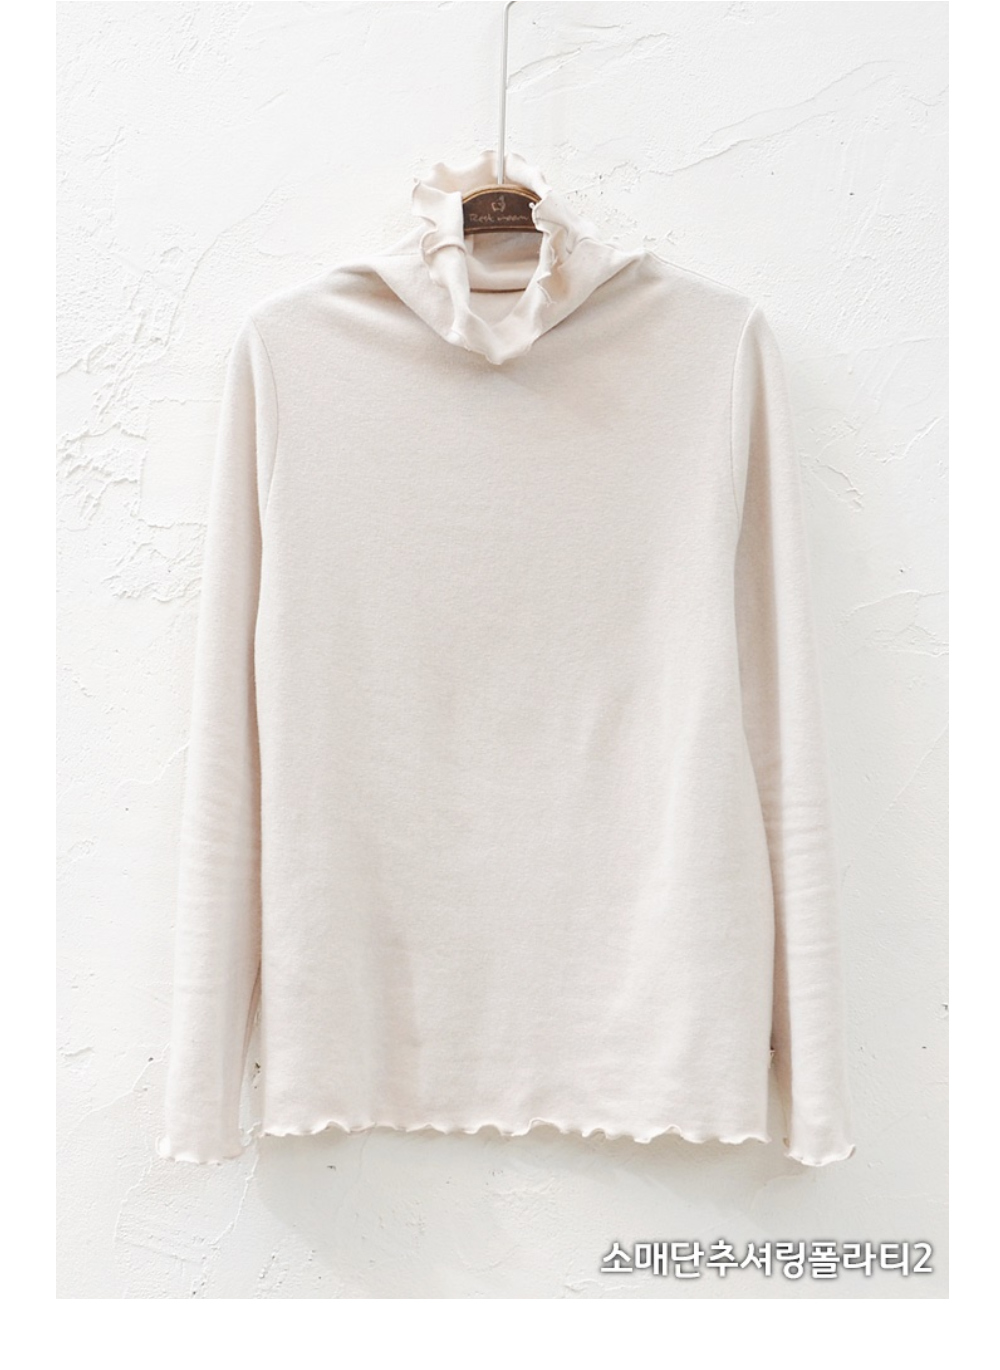 long sleeved tee white color image-S1L35